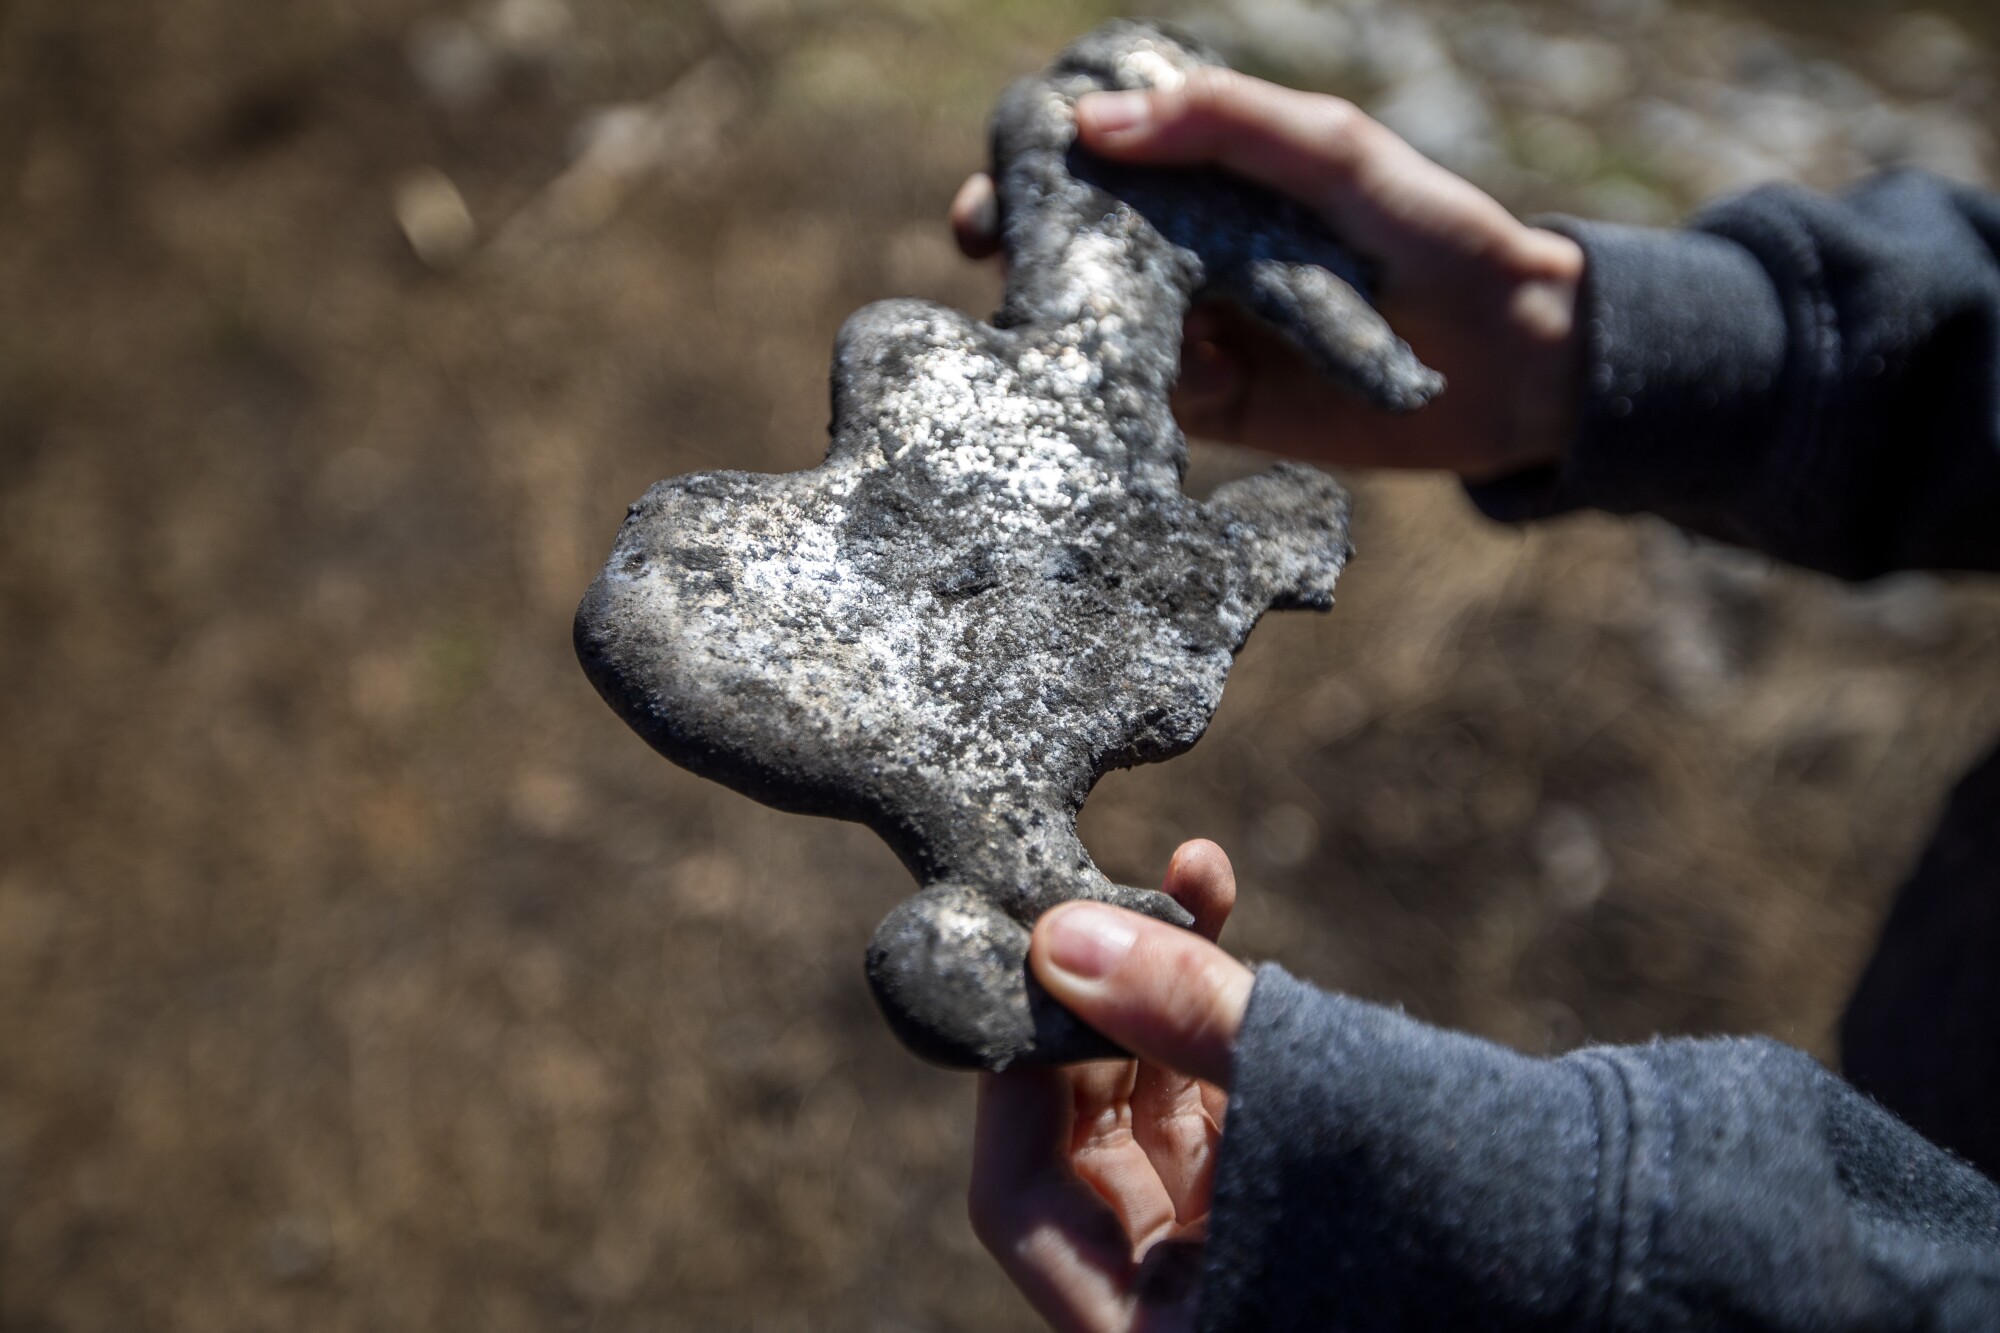 Pandora Hammonds, 9, holds a piece of melted aluminum on their family's property in Grizzly Flats.